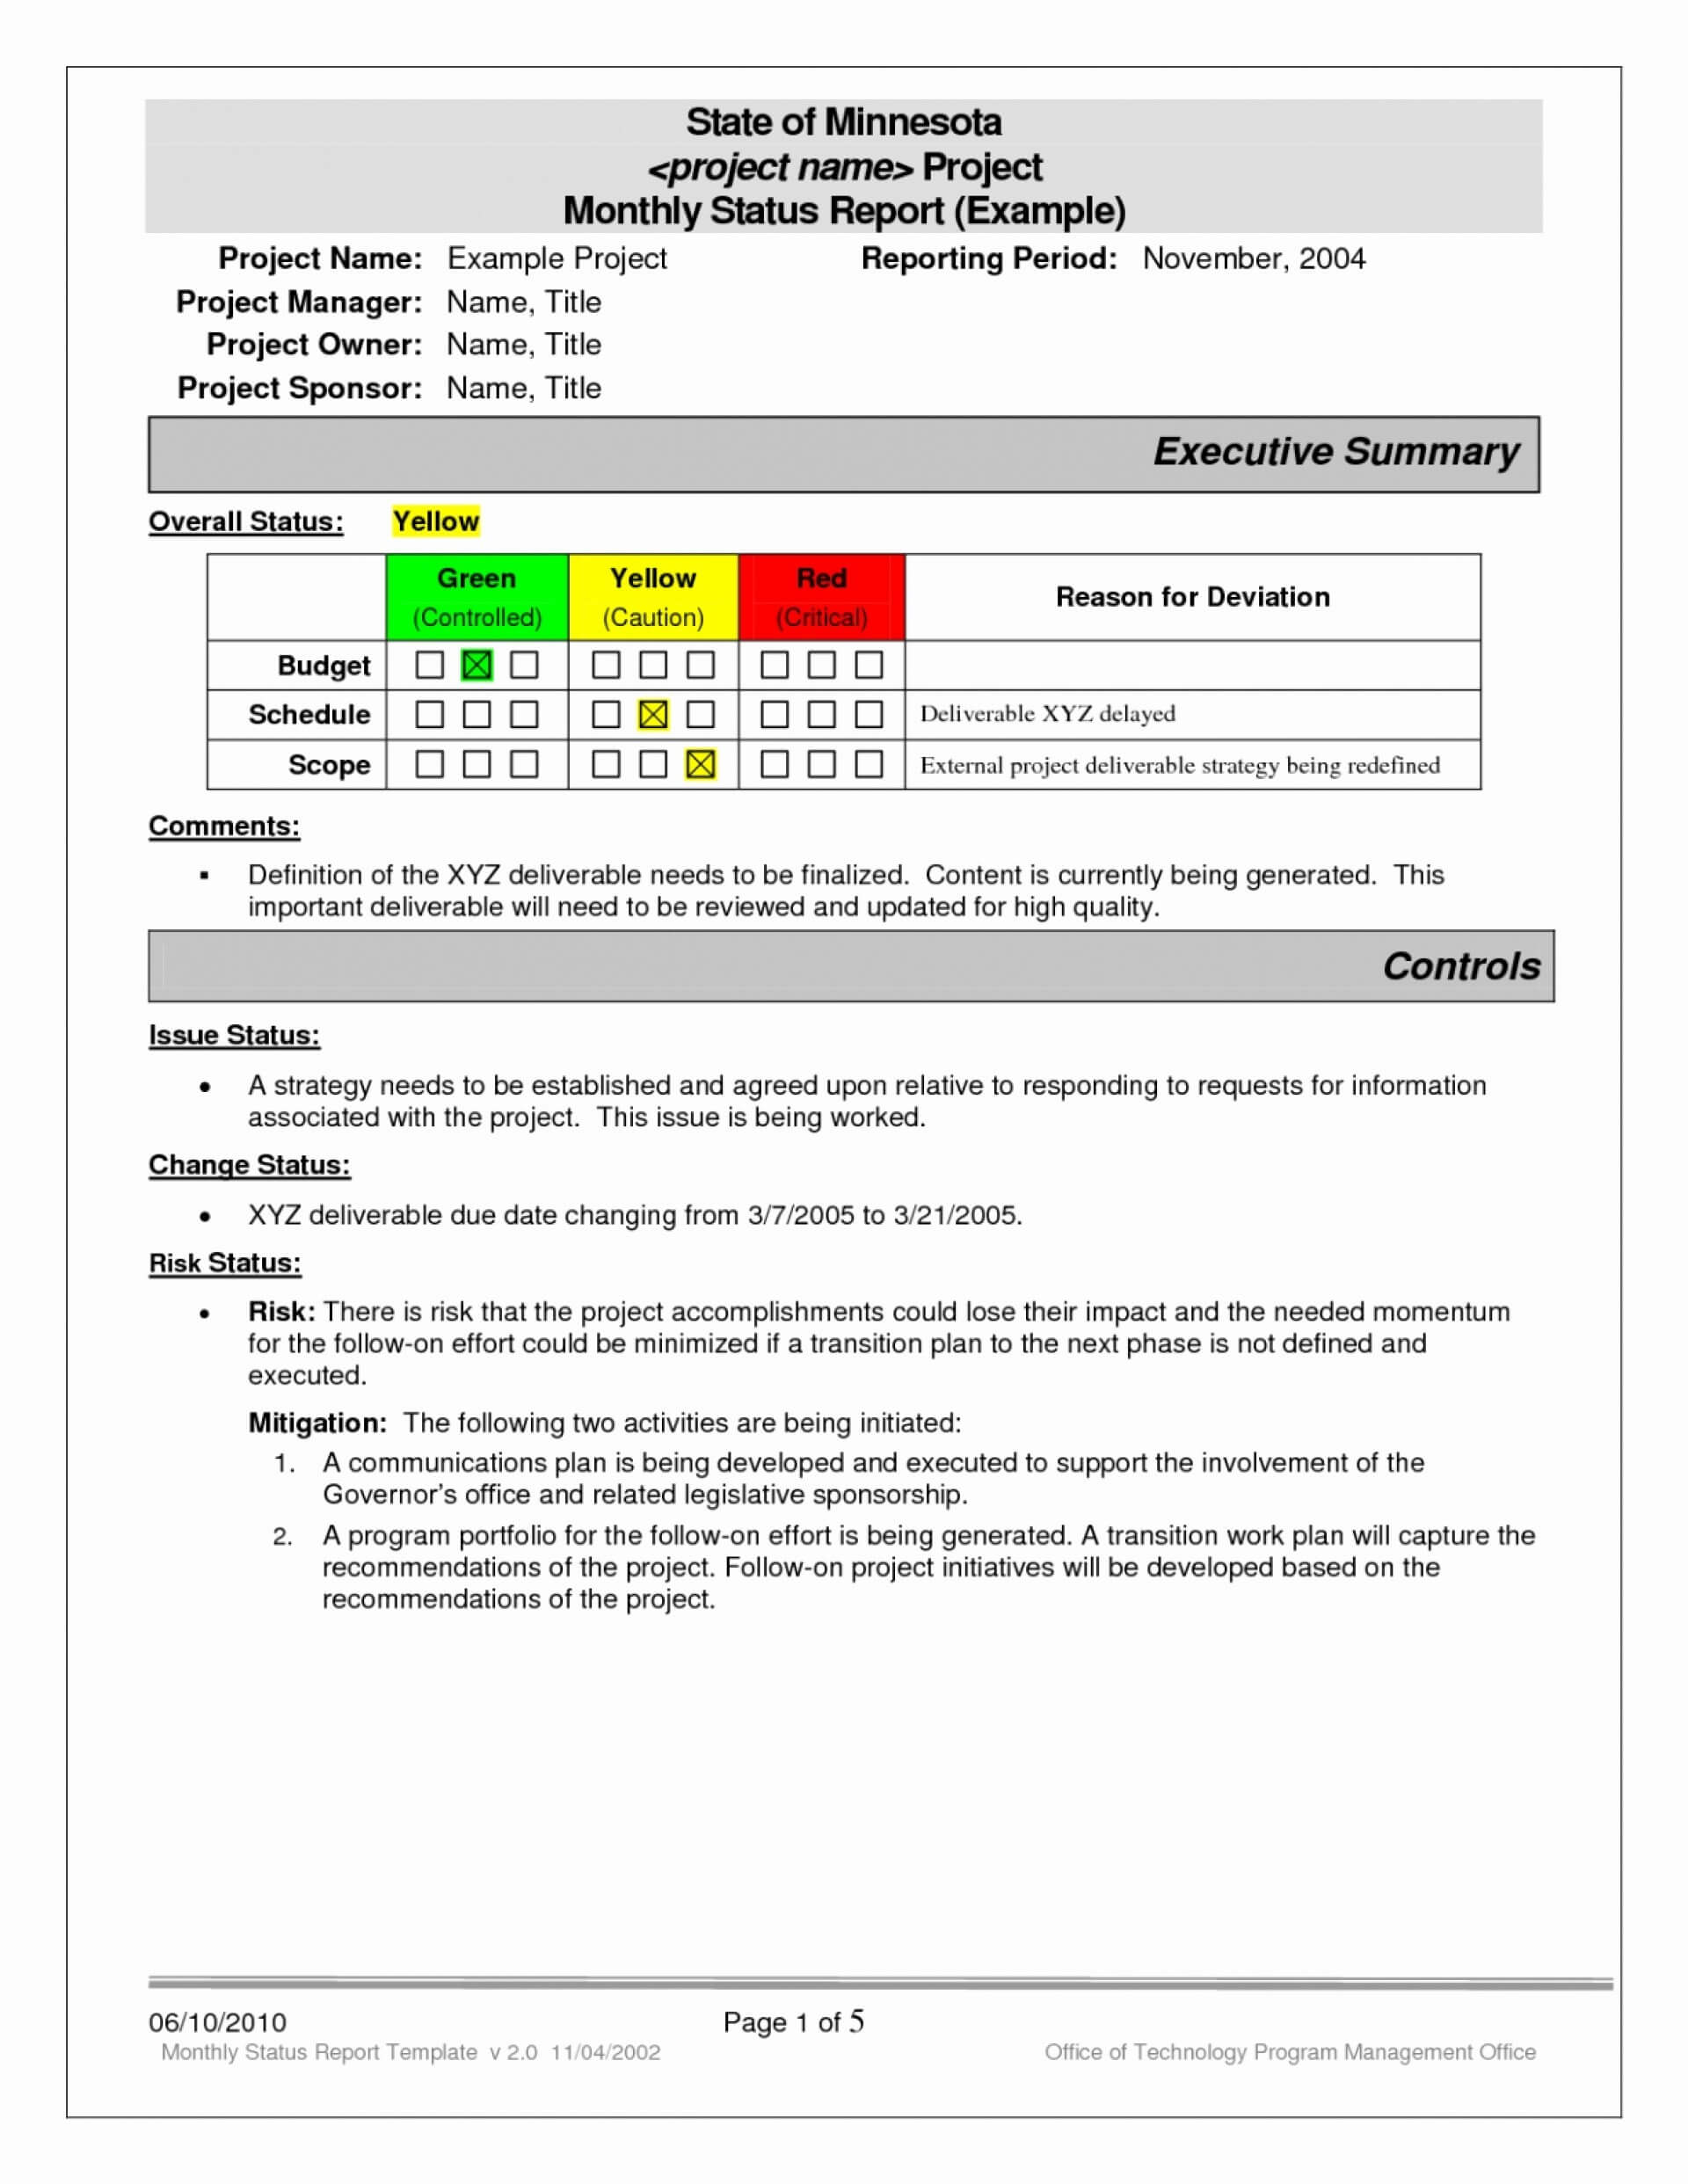 023 Excel Project Status Report Weekly Template 4Vy49Mzf Within Project Status Report Template Word 2010